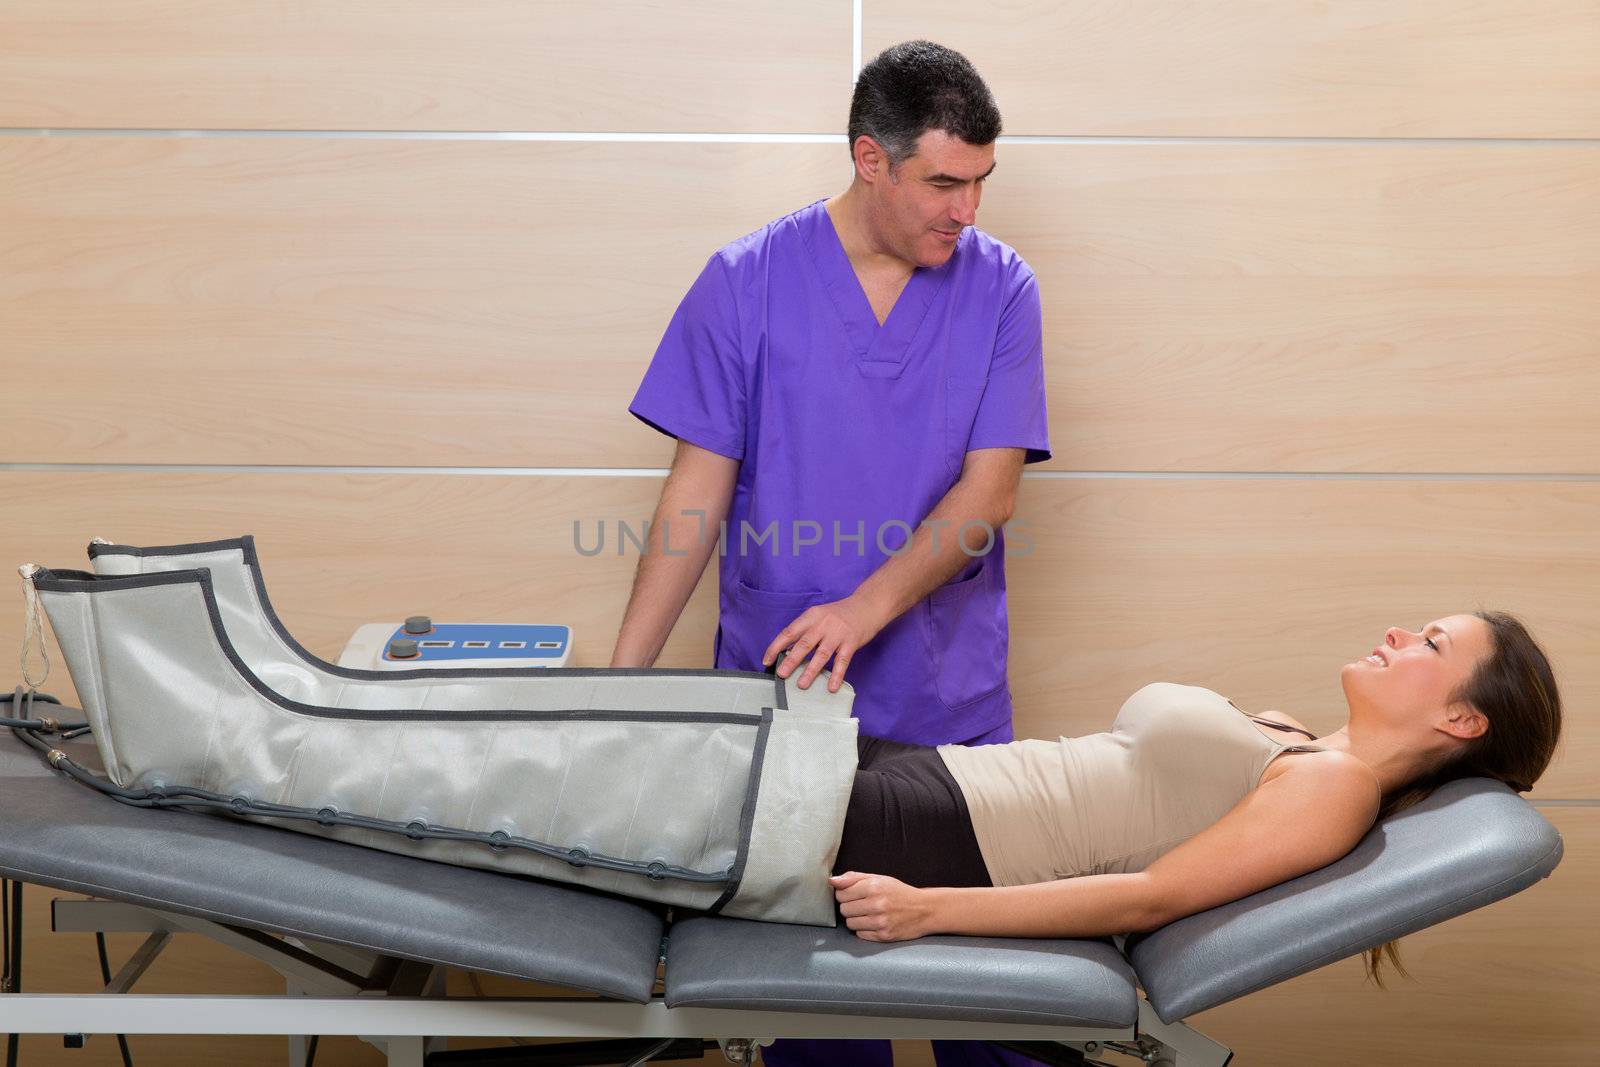 Doctor checking legs pressotherapy machine on woman patient in hospital bed